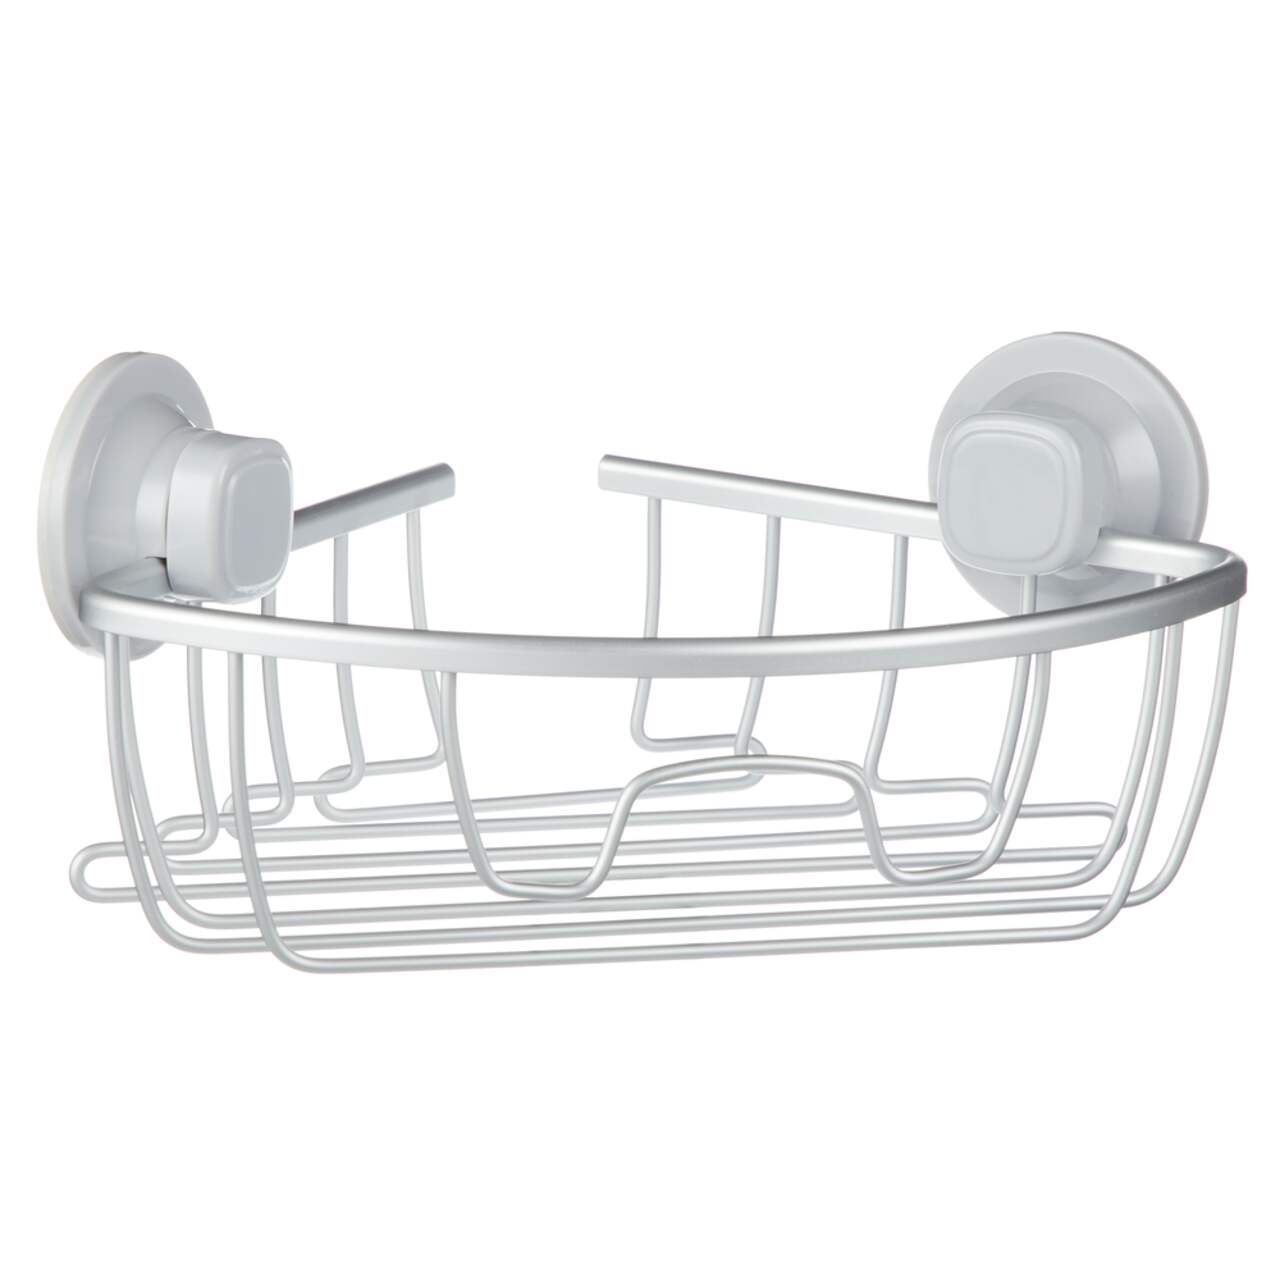 https://media-www.canadiantire.ca/product/living/home-decor/bed-bath-decor/0632484/for-living-aluminum-suction-corner-caddy-05dff884-bd3b-44ca-a394-1b6fc1a40826.png?imdensity=1&imwidth=640&impolicy=mZoom